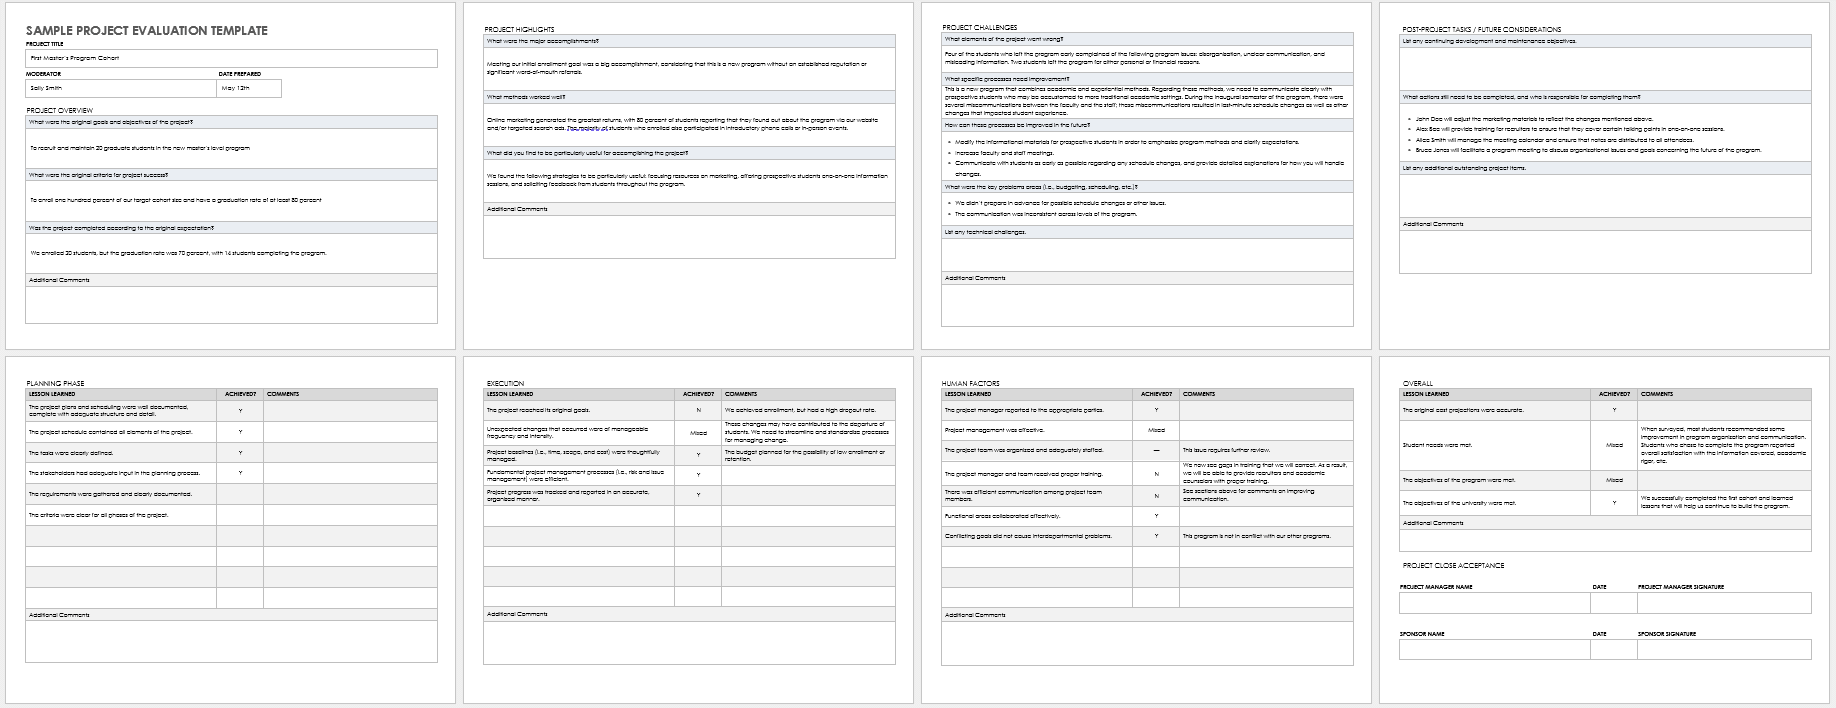 Sample Project Evaluation Template